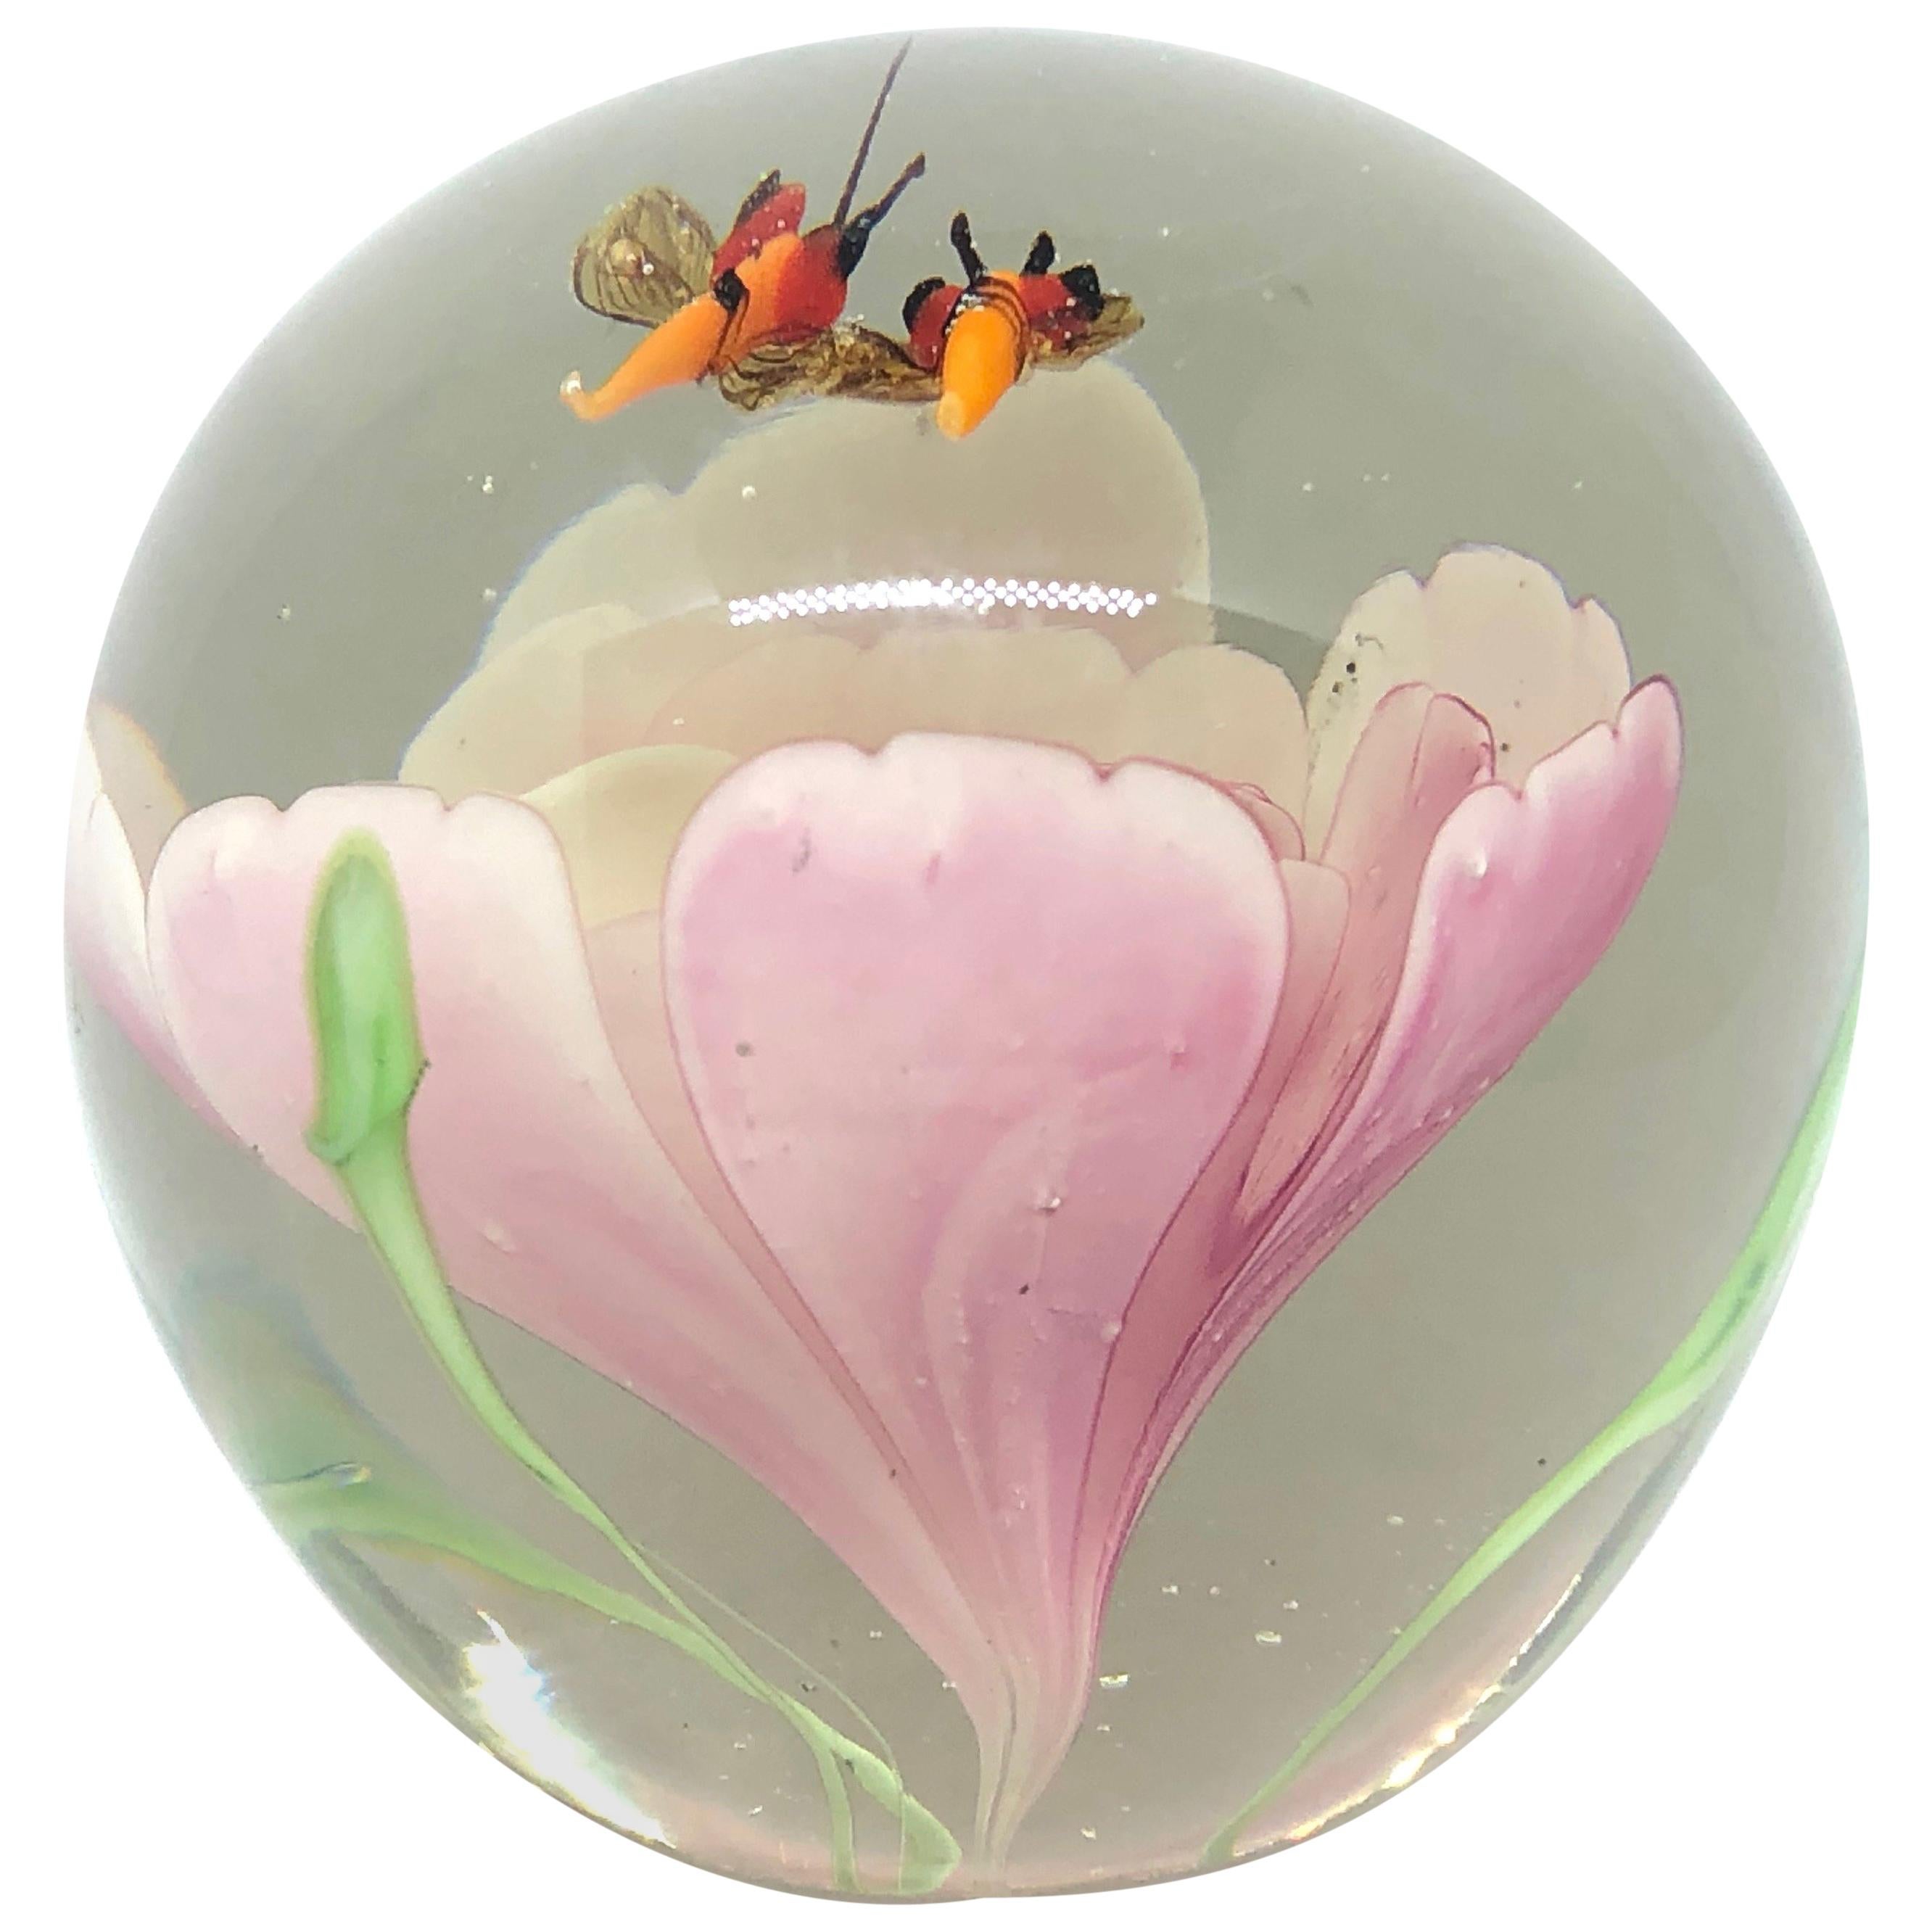 Vintage Glass Paperweight w 6 Internal Flowers & 1 External Ladybug Collectible Paperweight Office and Spring Decor Handmade